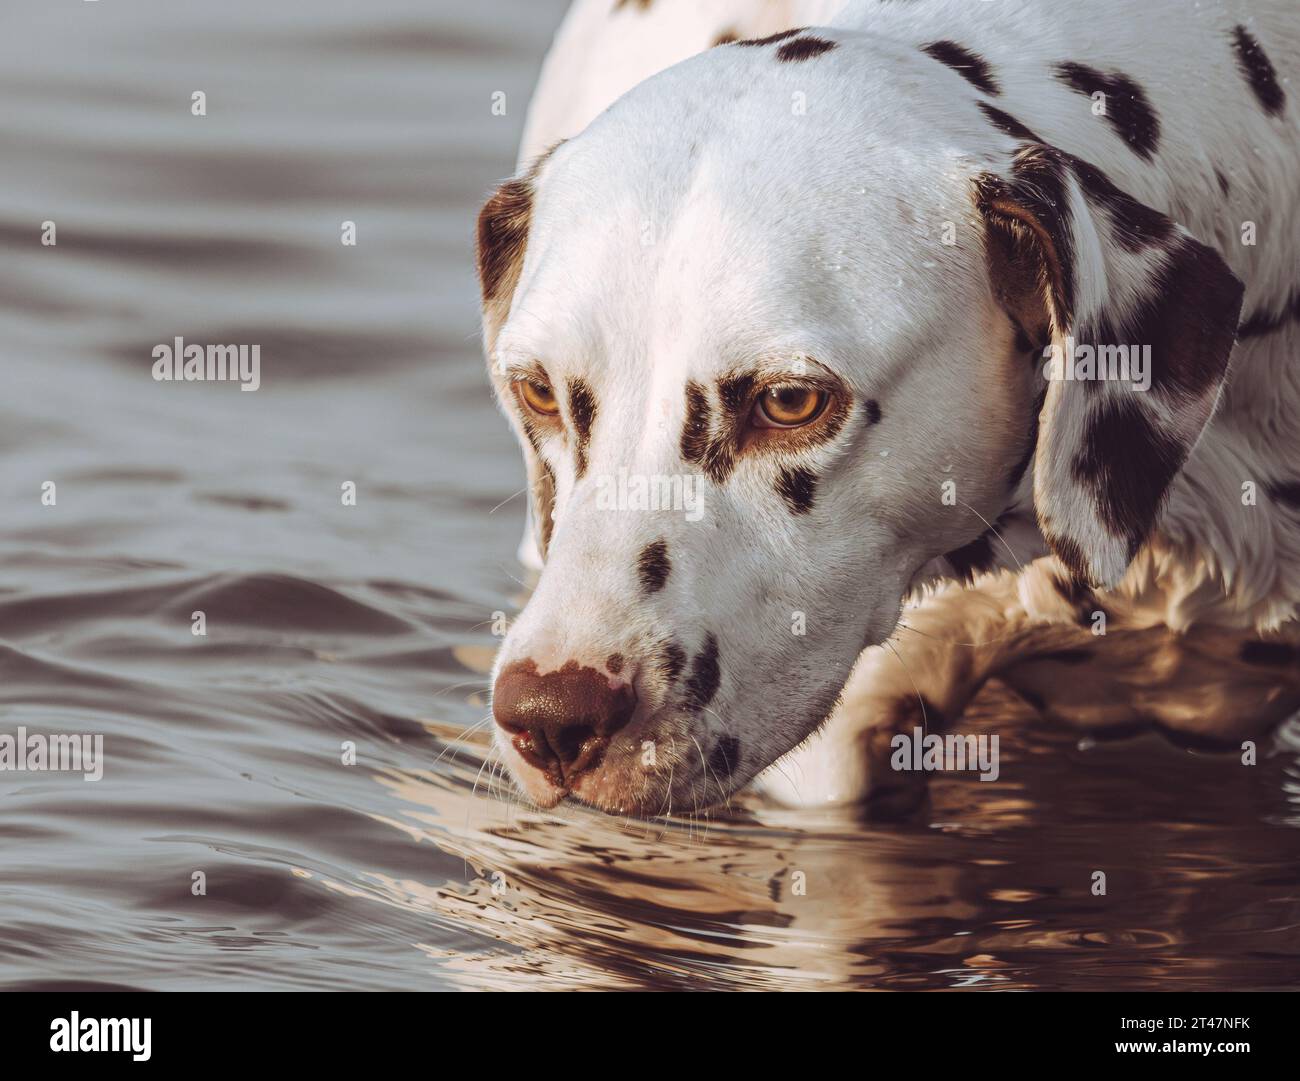 dalmatian dog playing in the water Stock Photo